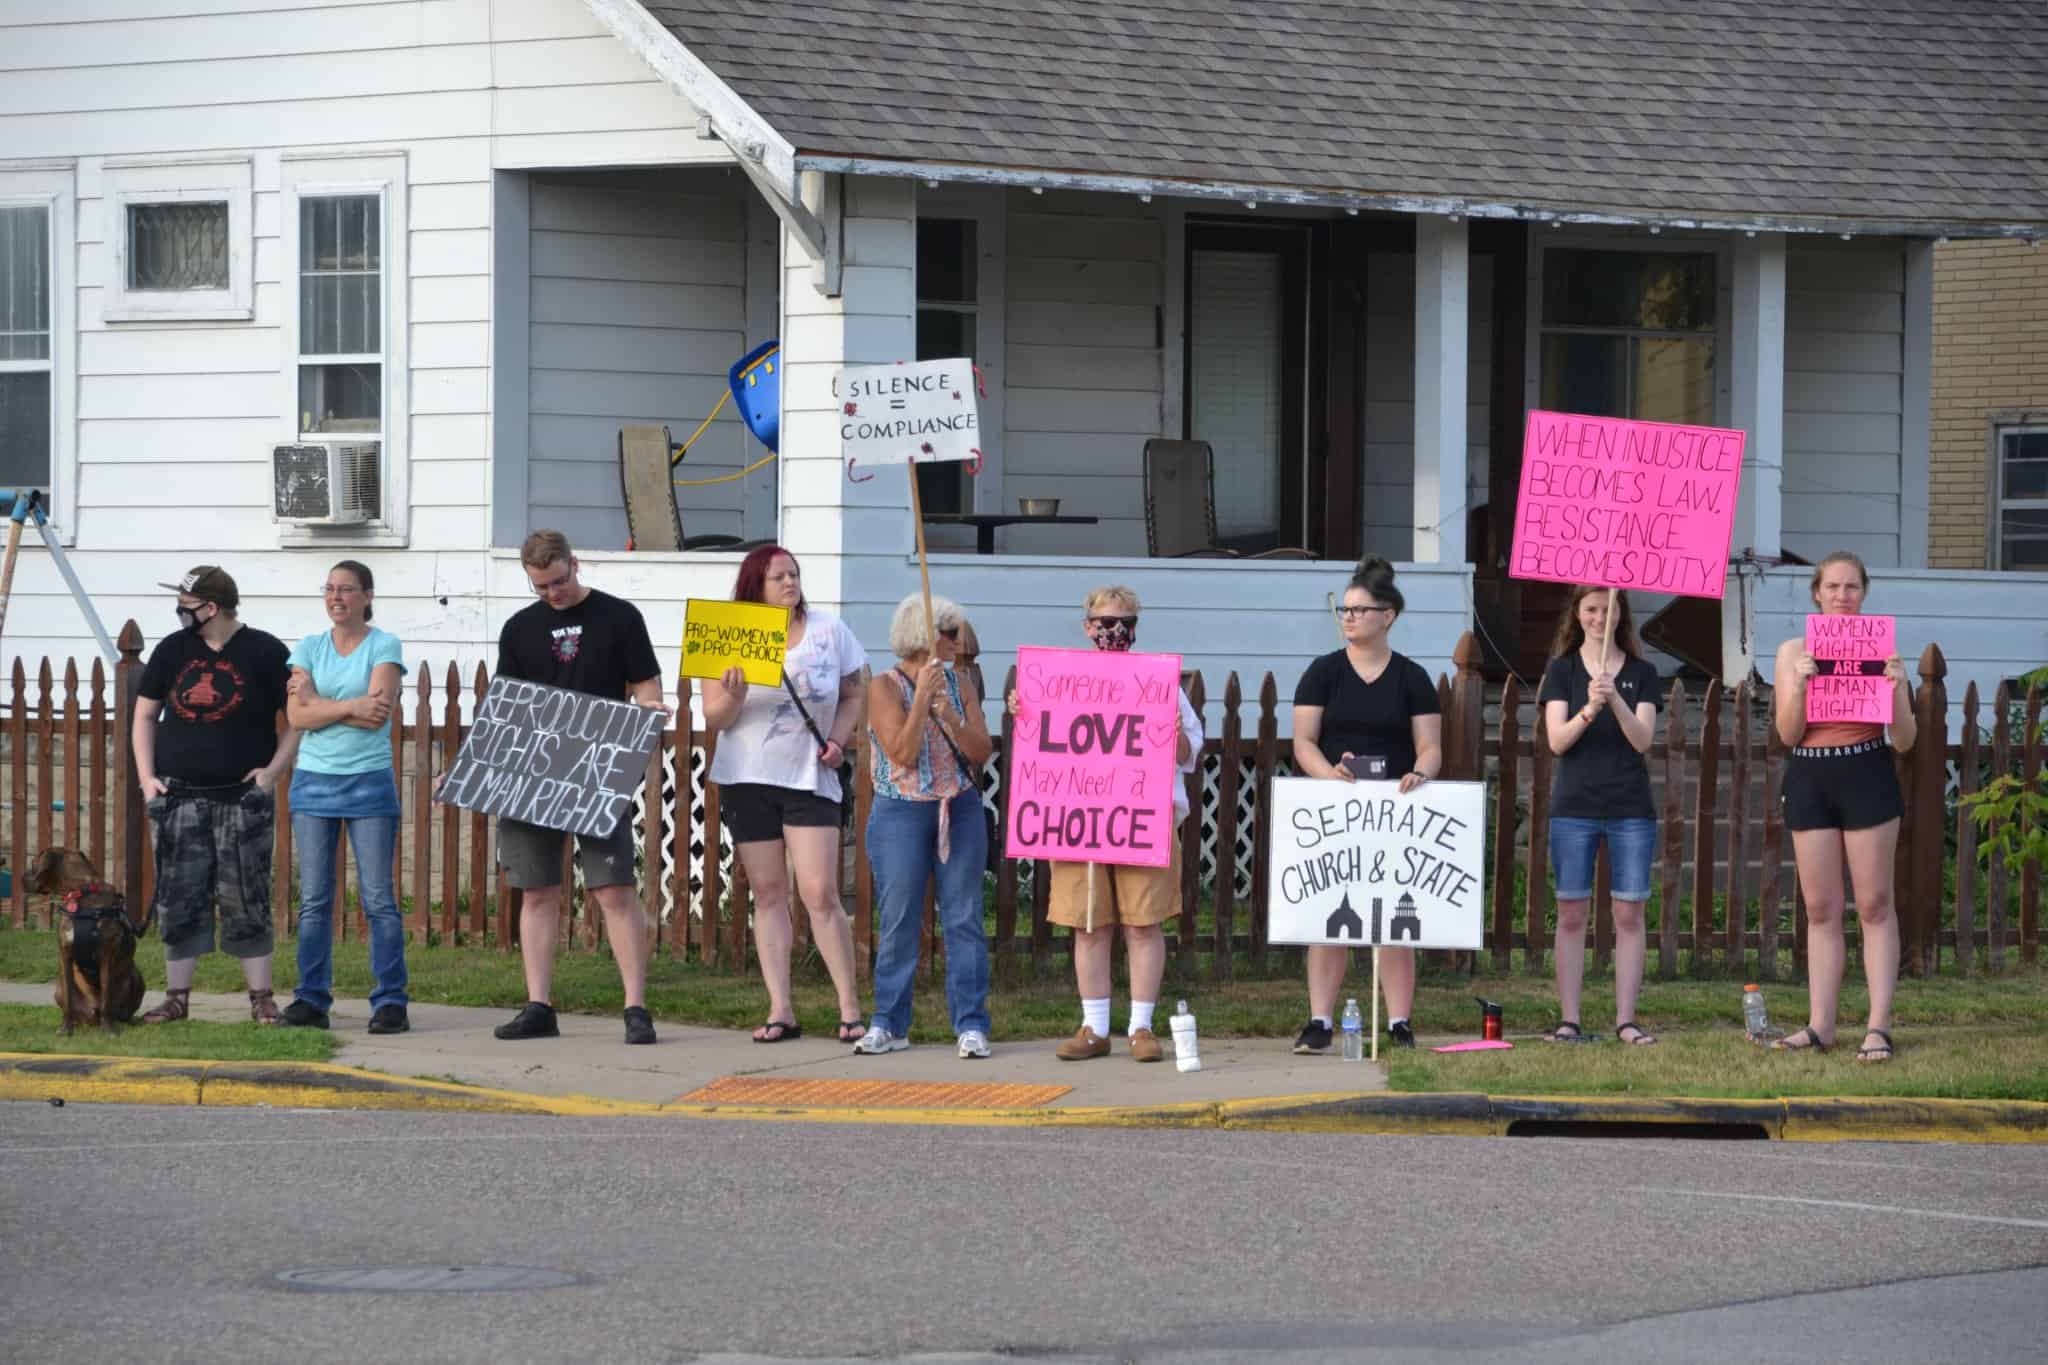 Pro-choice supporters hold protest in Tomahawk